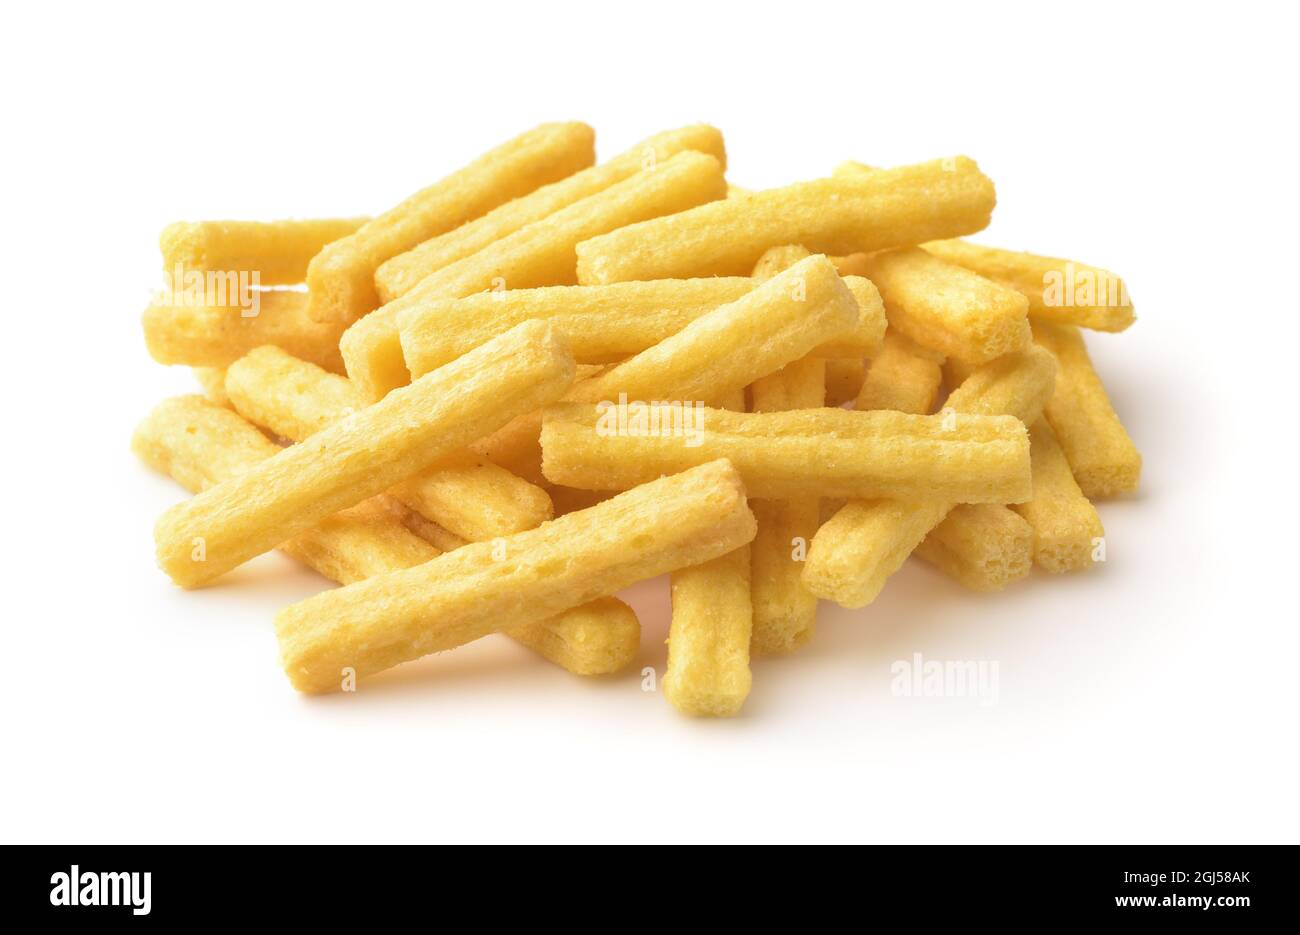 Pile of wheat puffed sticks isolated on white Stock Photo